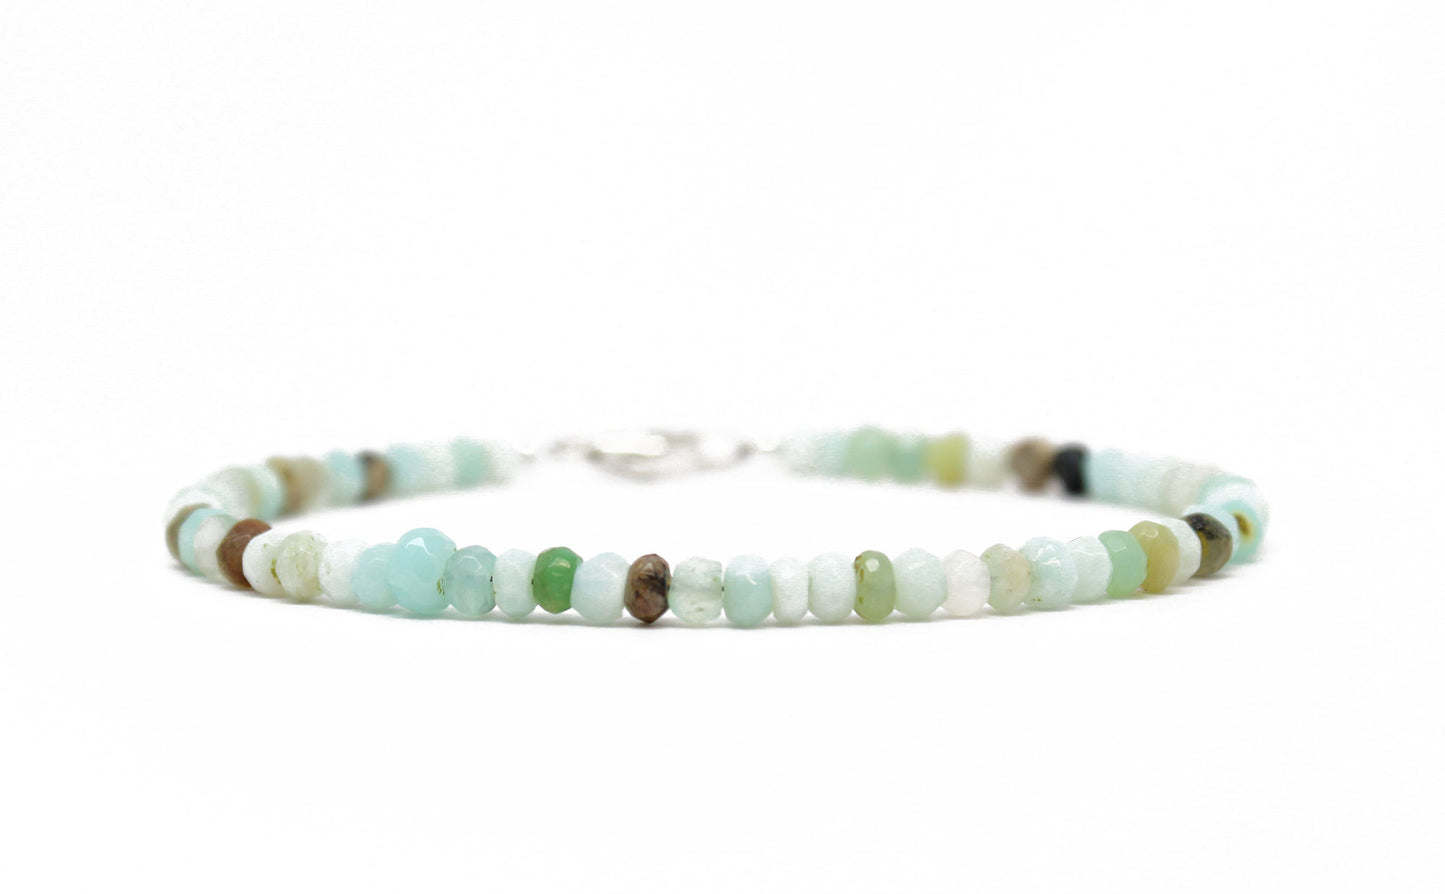 Delicate Peruvian Opal Bracelet with Sterling Silver Clasp